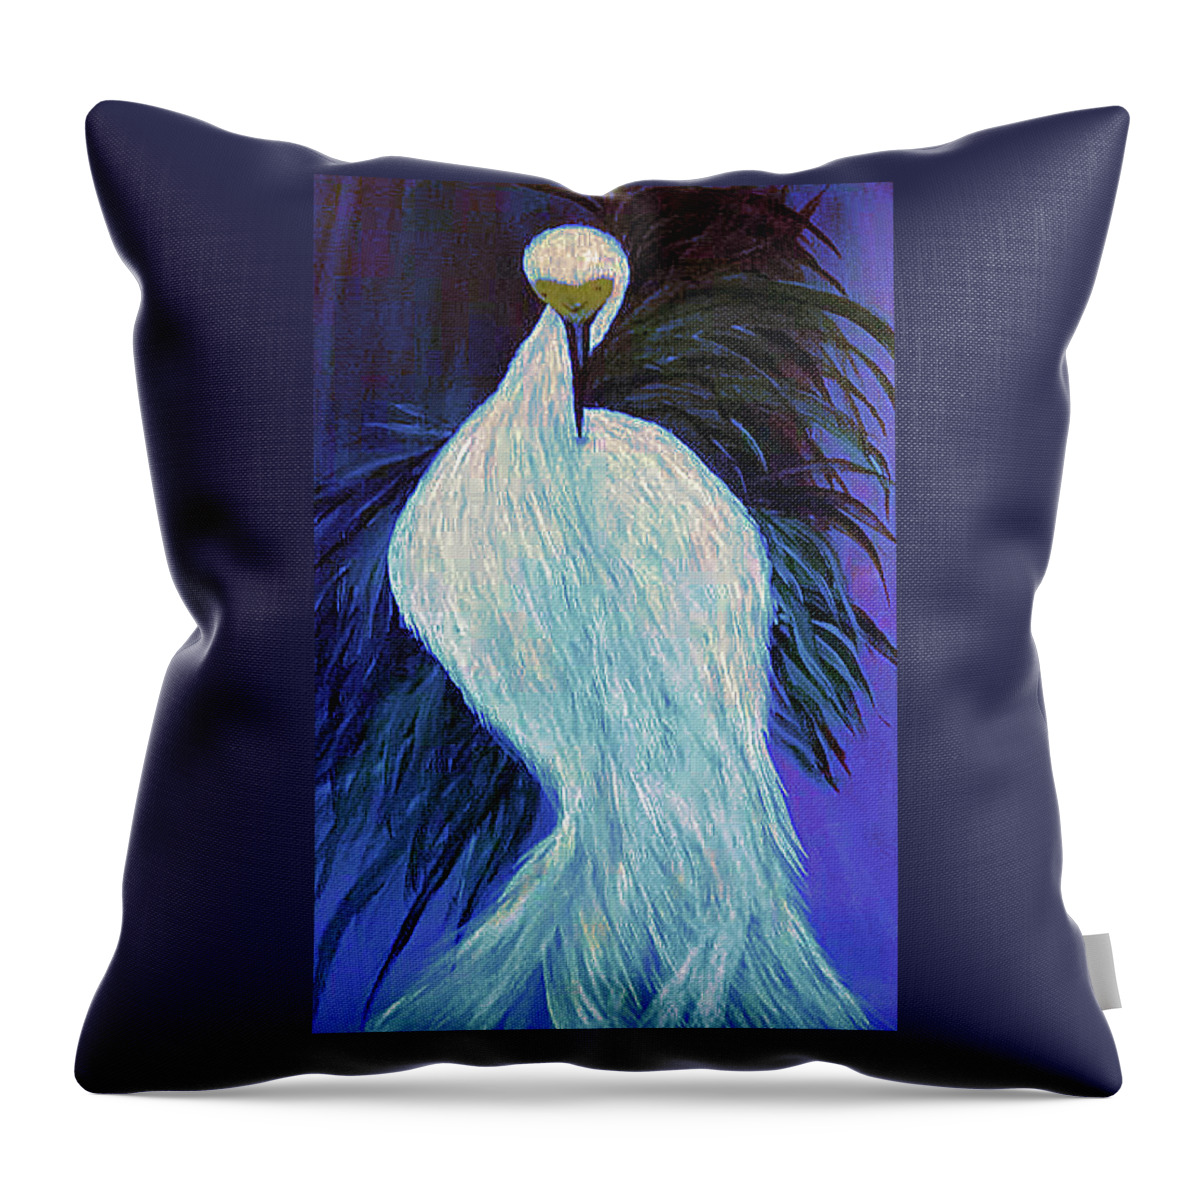 Wall Art Throw Pillow featuring the painting Dantoa by Art by Gabriele